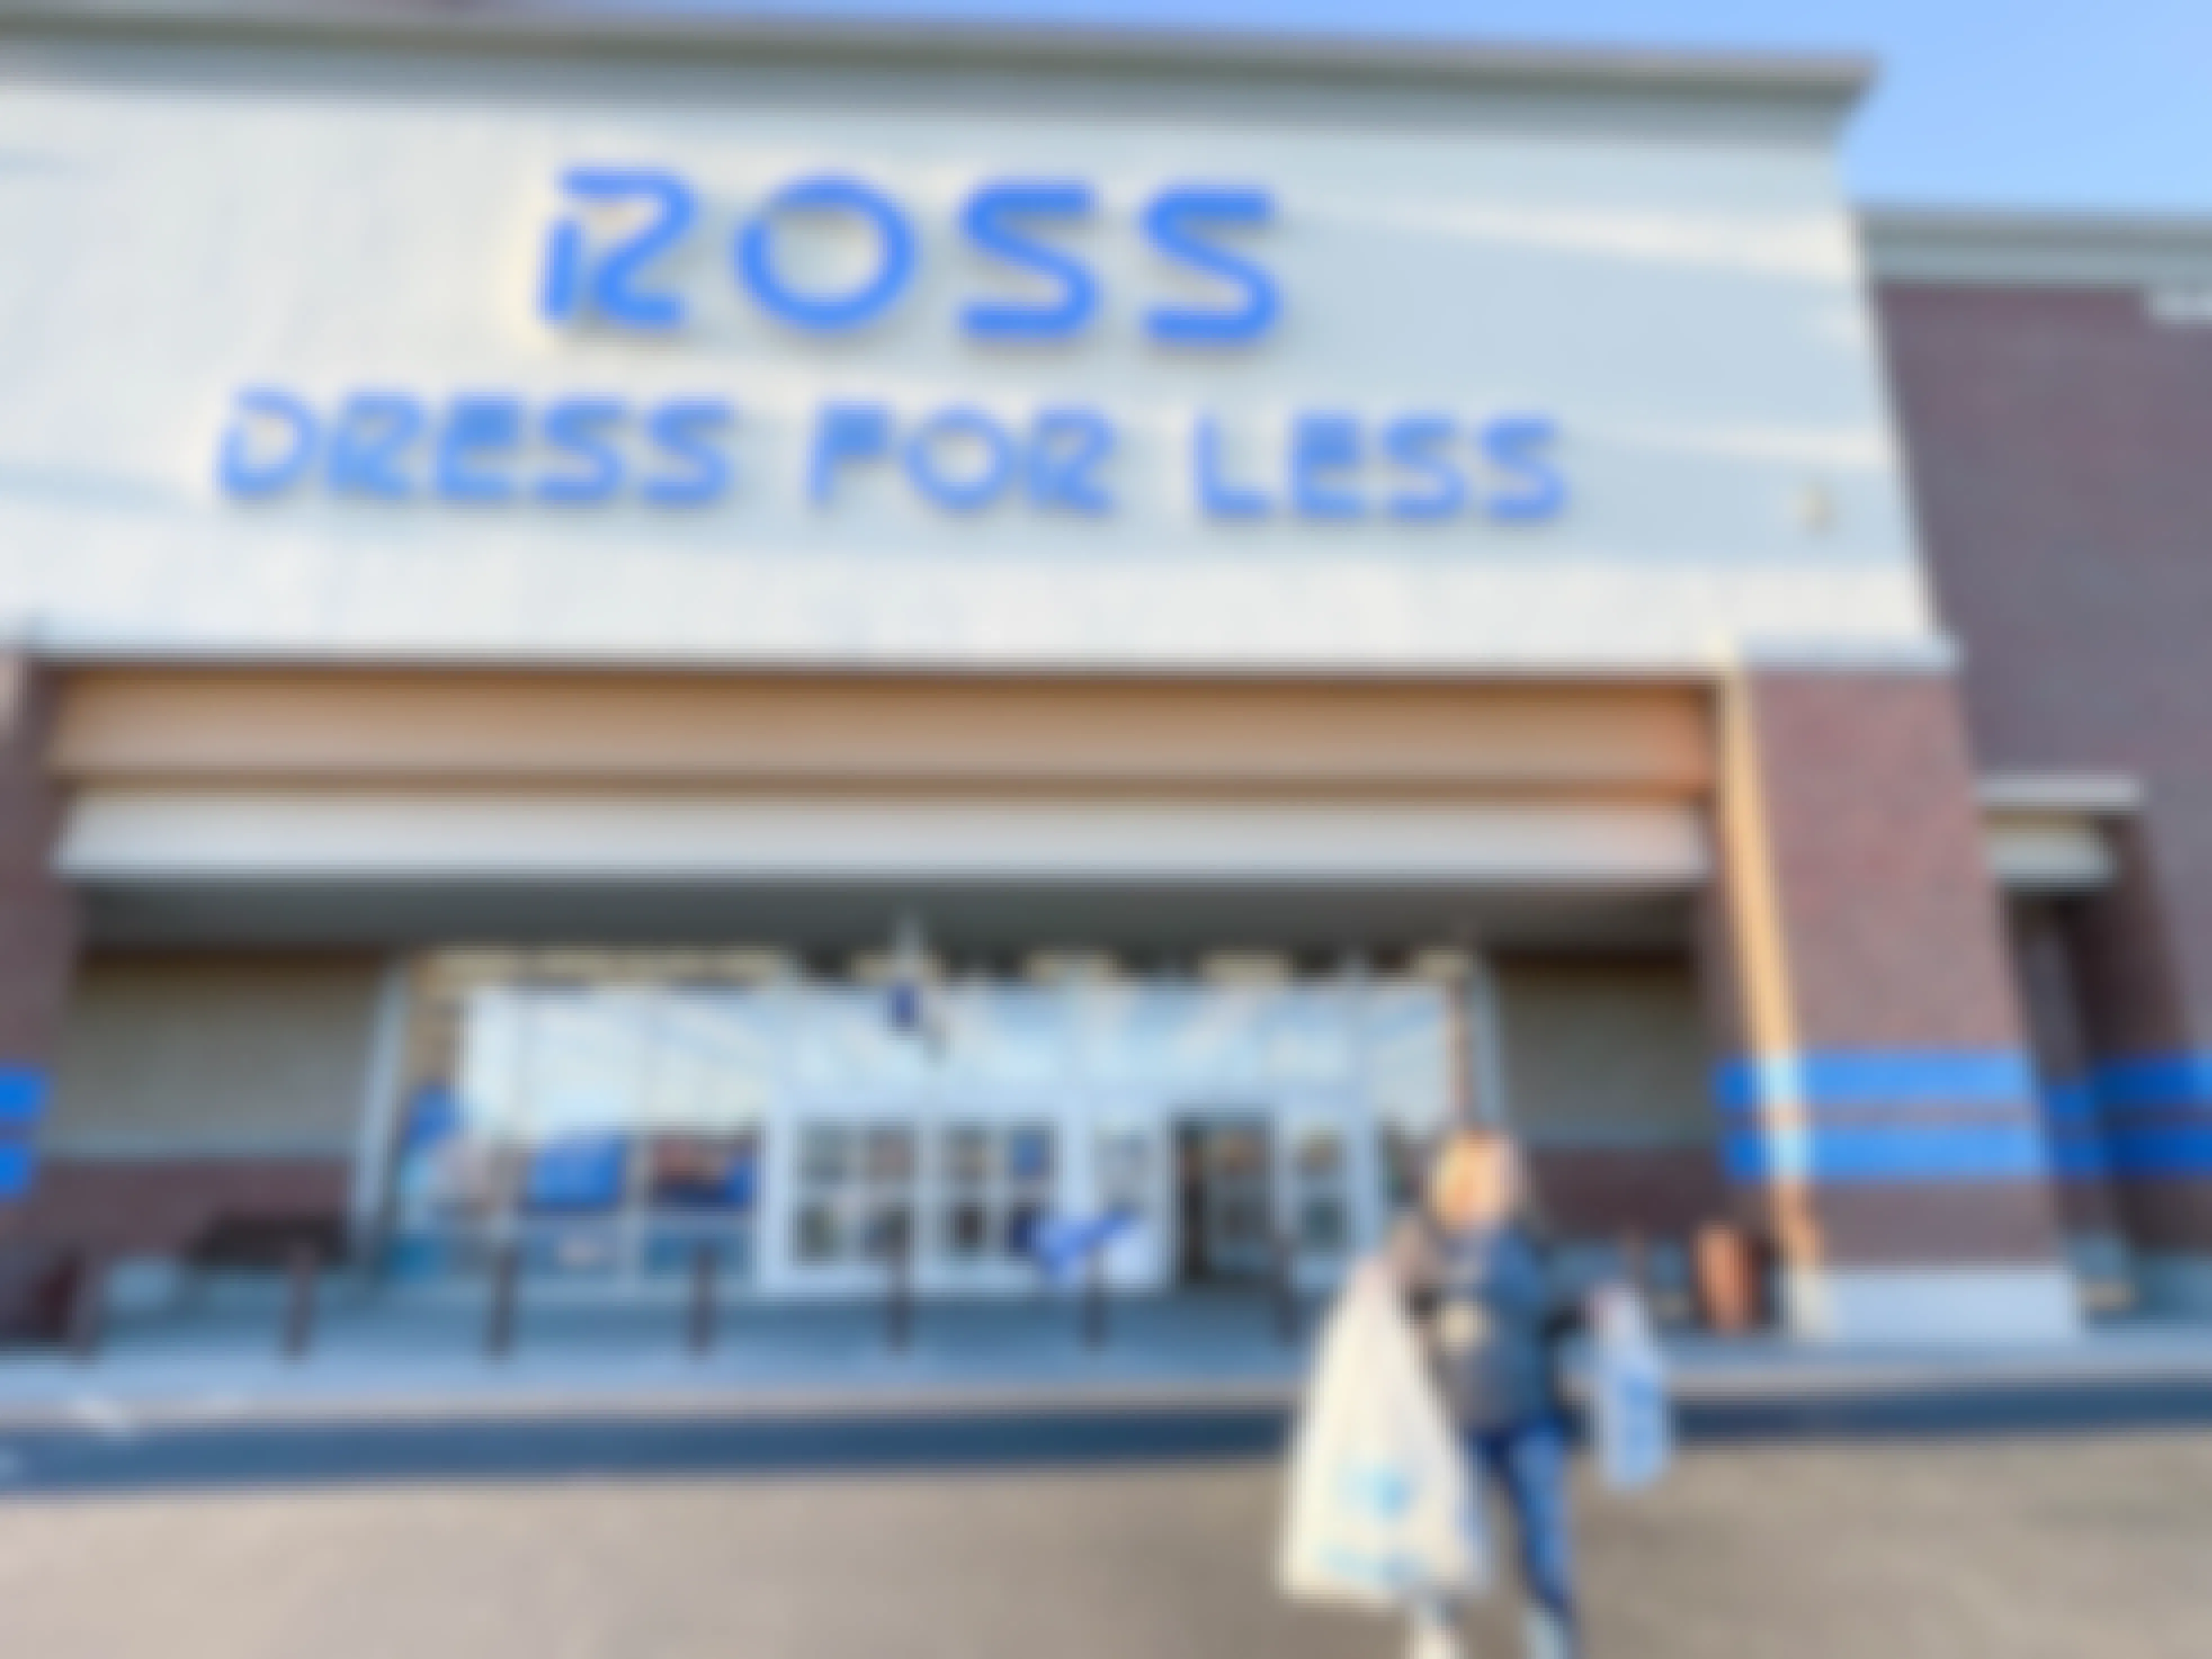 woman walking out of Ross dress for less store.